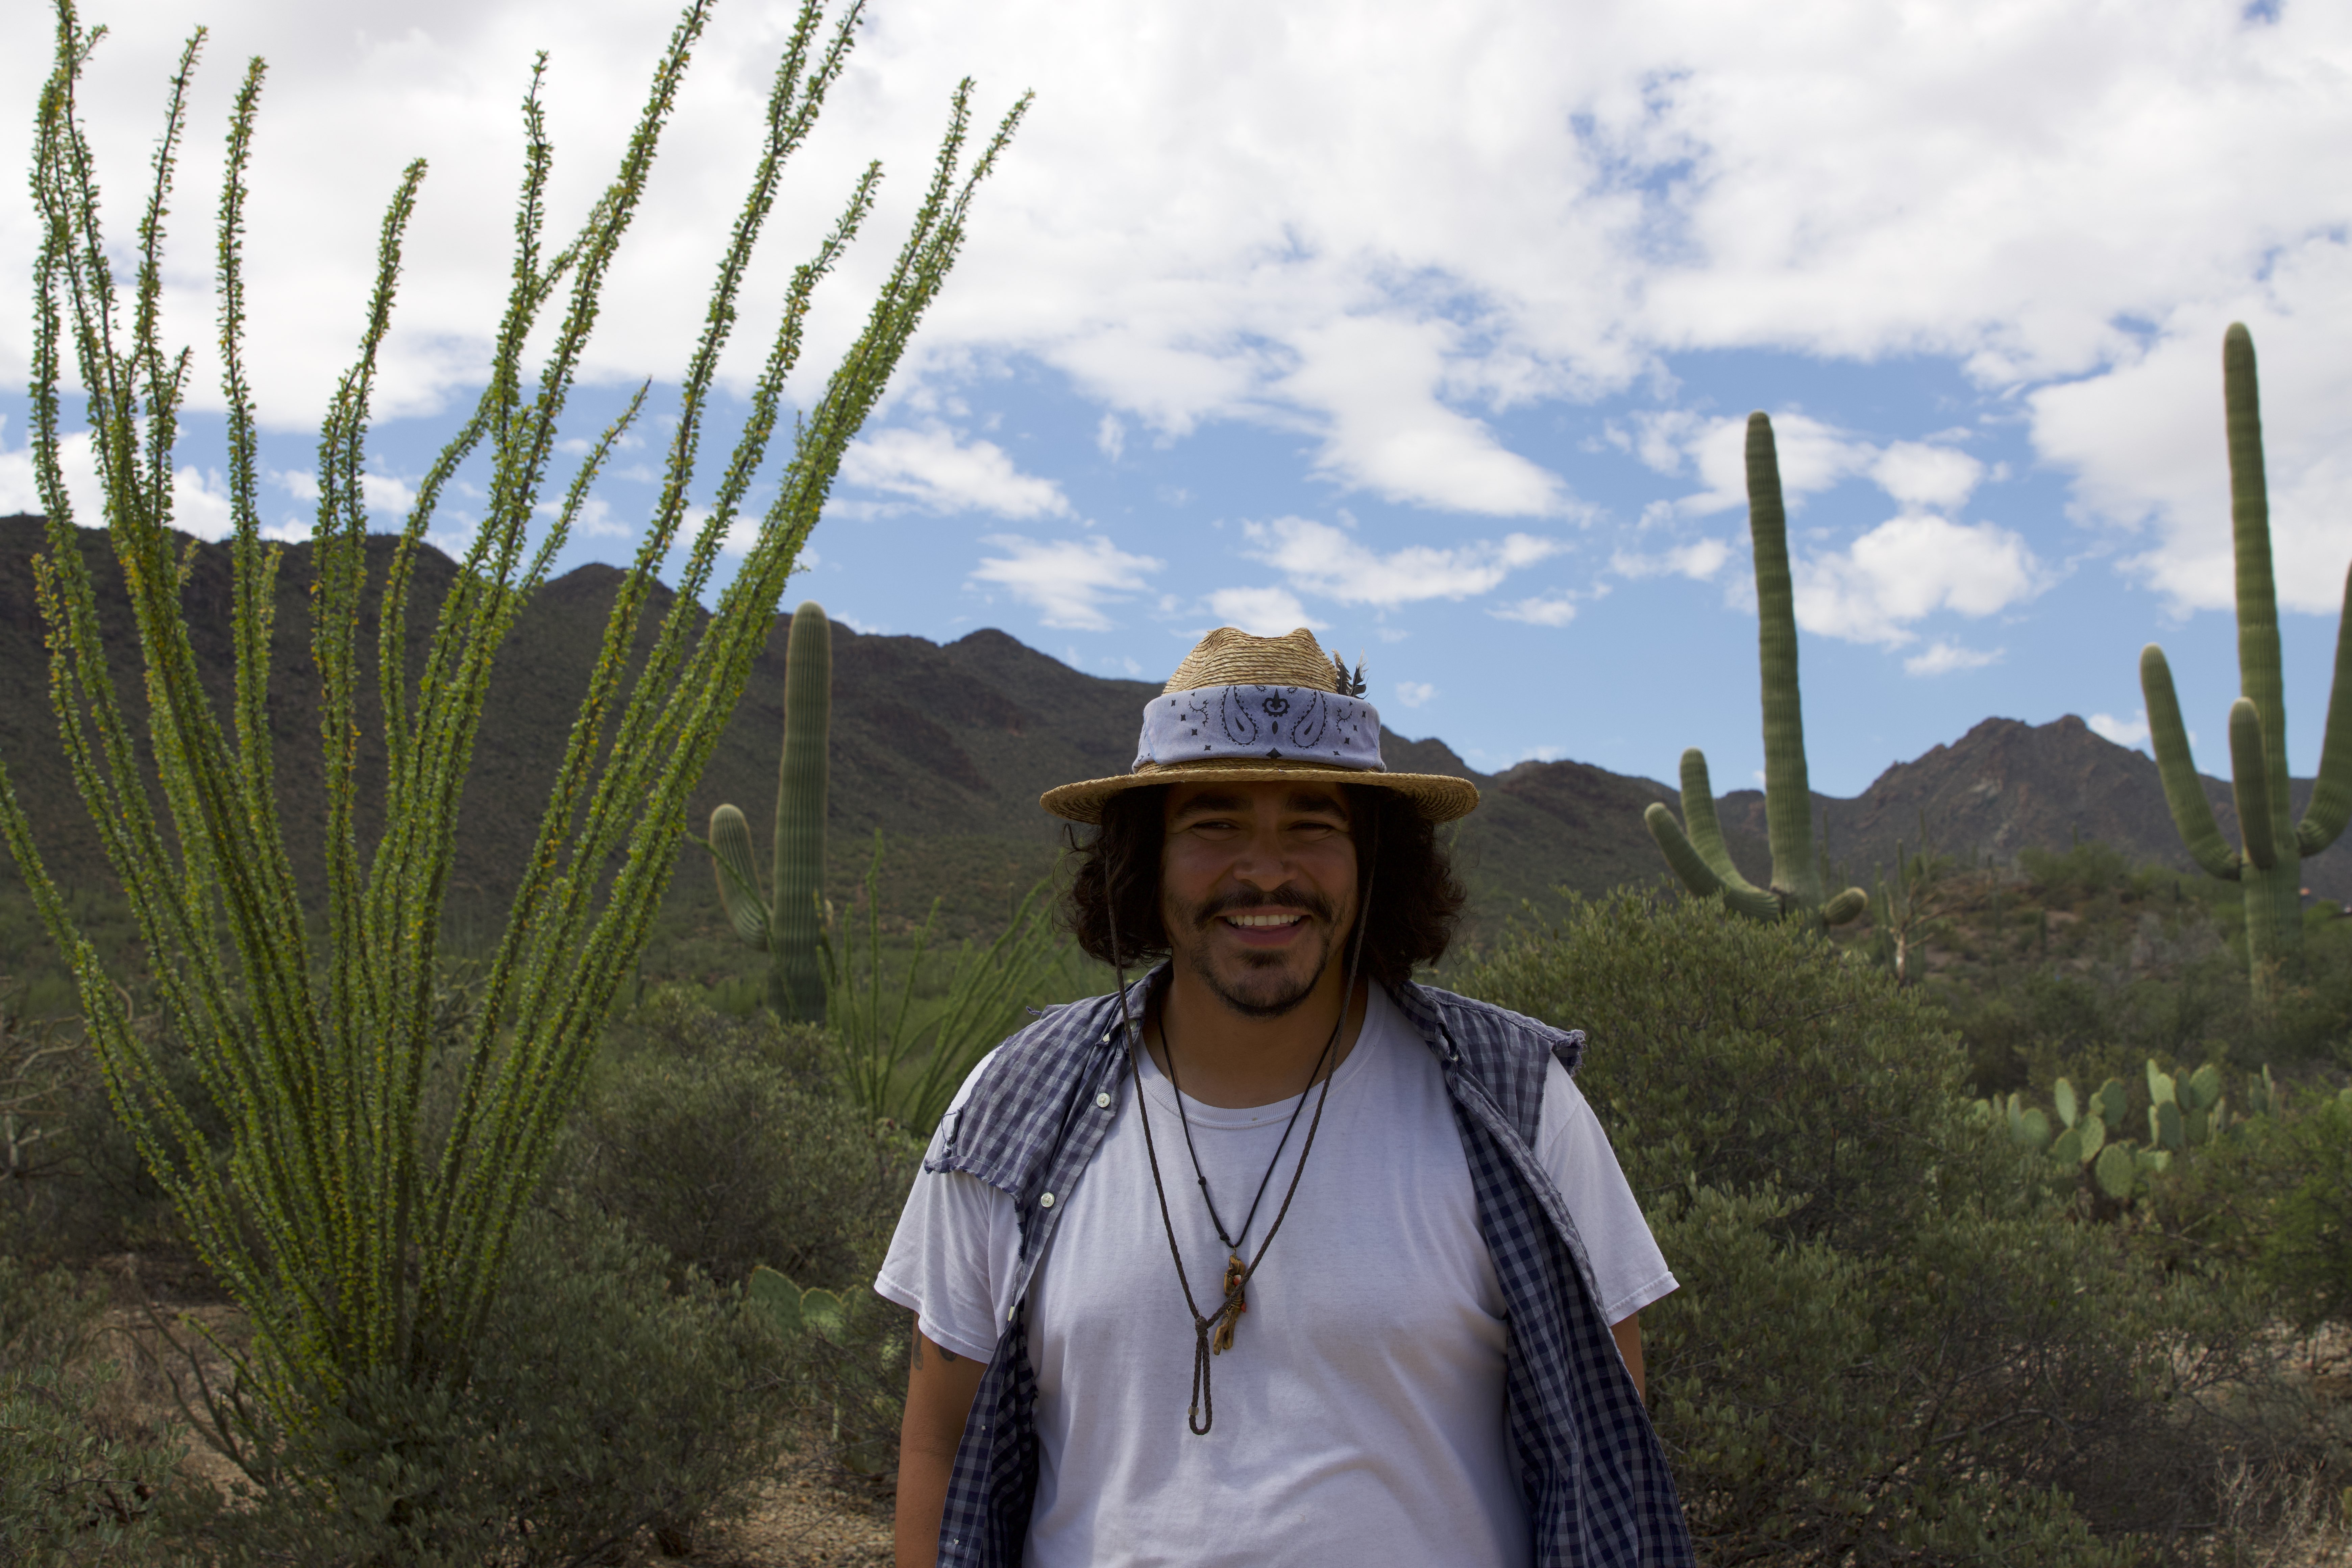 Isaac Silva wearing a hat and white shirt outside under a sunny sky with desert scenery in the background outside under a sunny sky with desert scenery in the background